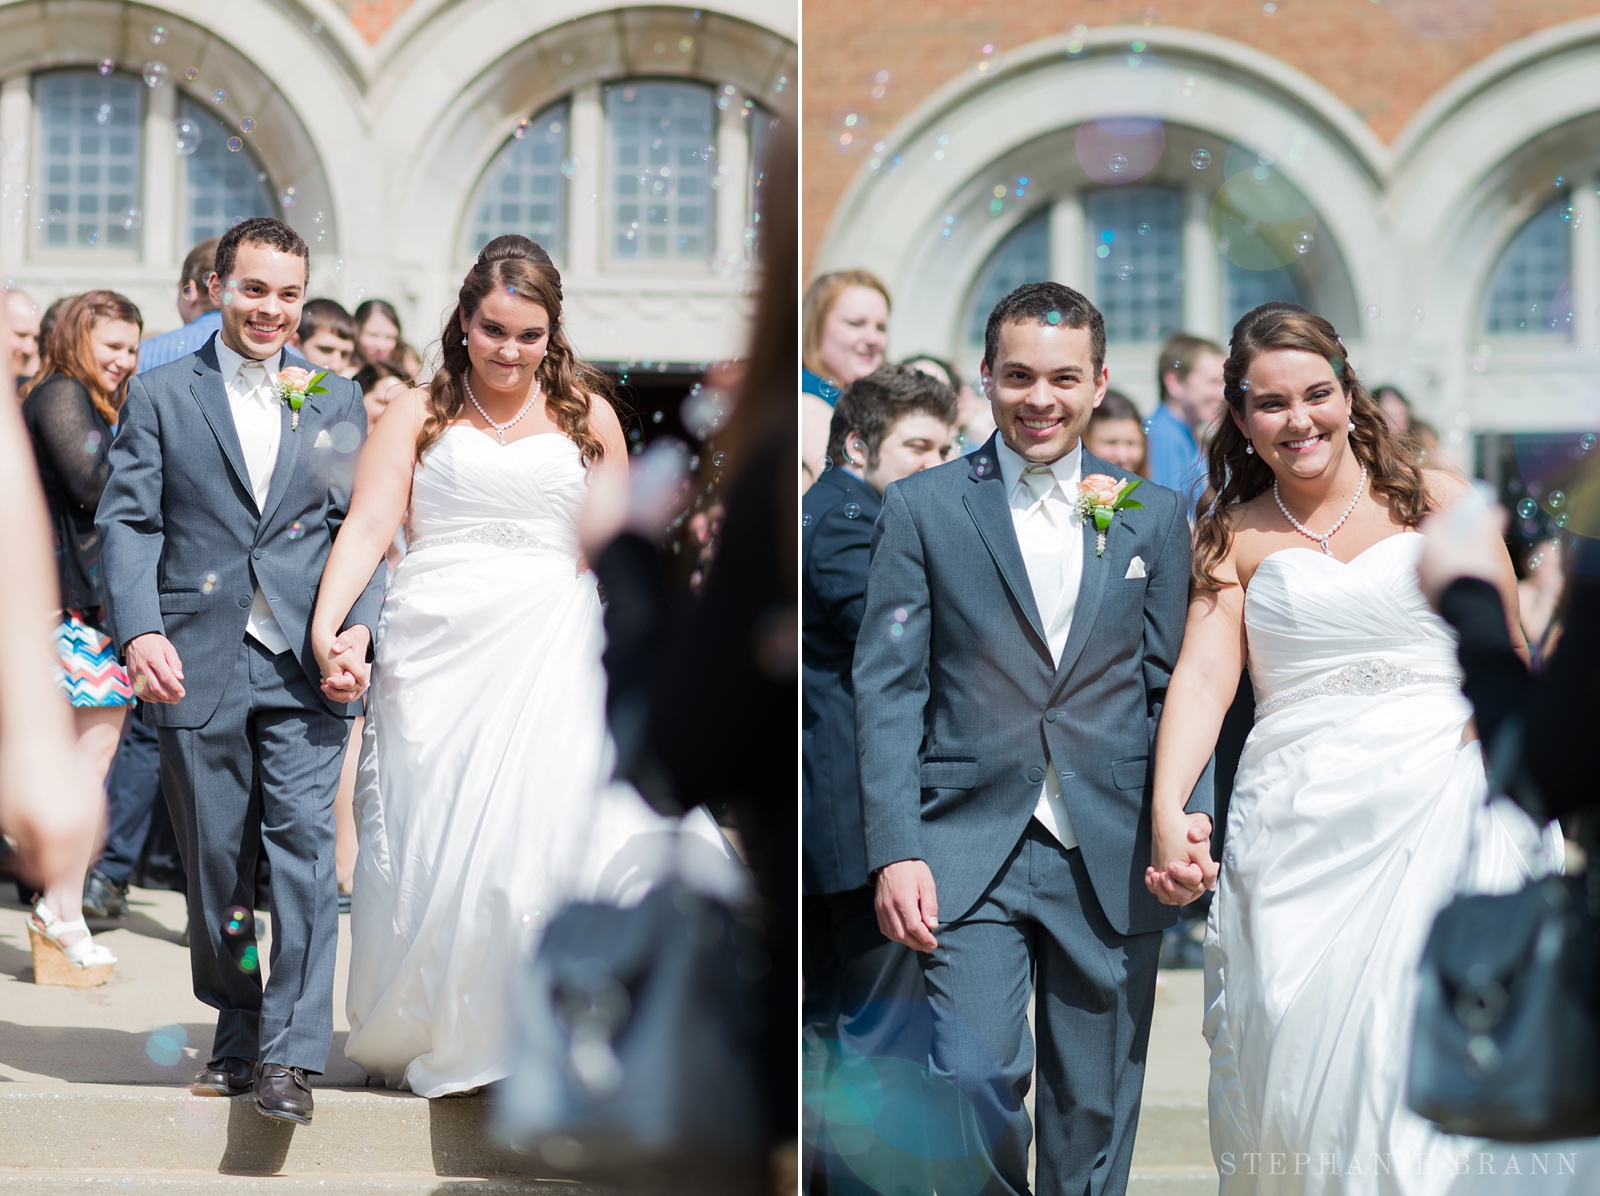 bride-and-groom-exiting-through-bubbles-outside-a-chapel